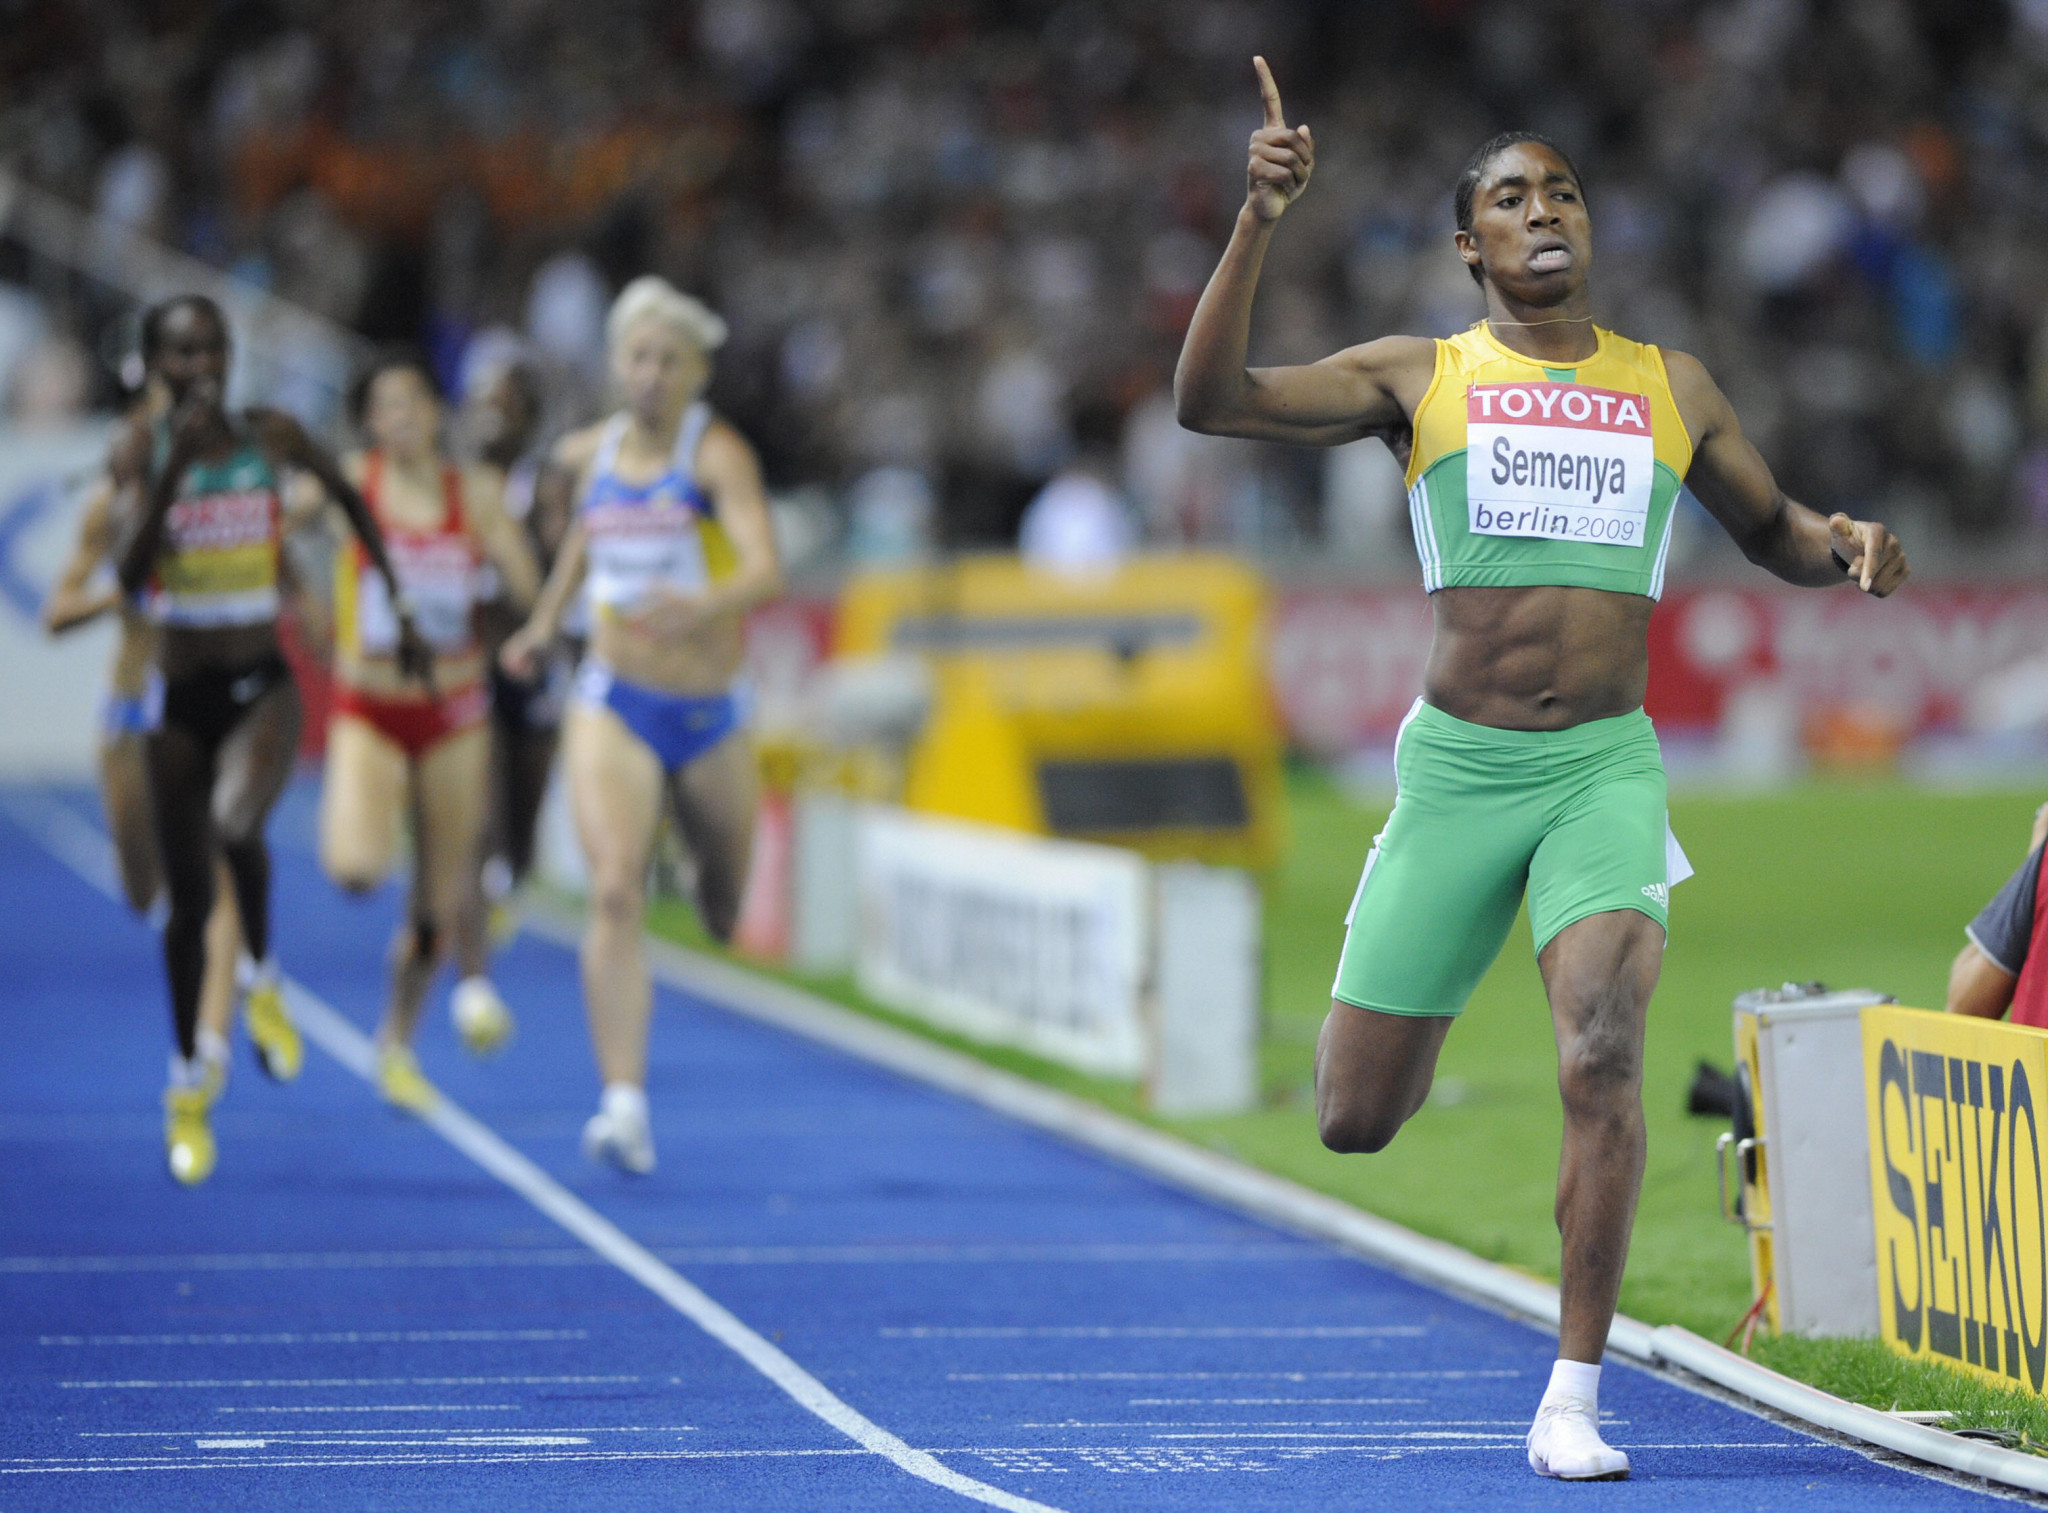 IAAF President Coe defends new female classification ruling in meeting ...